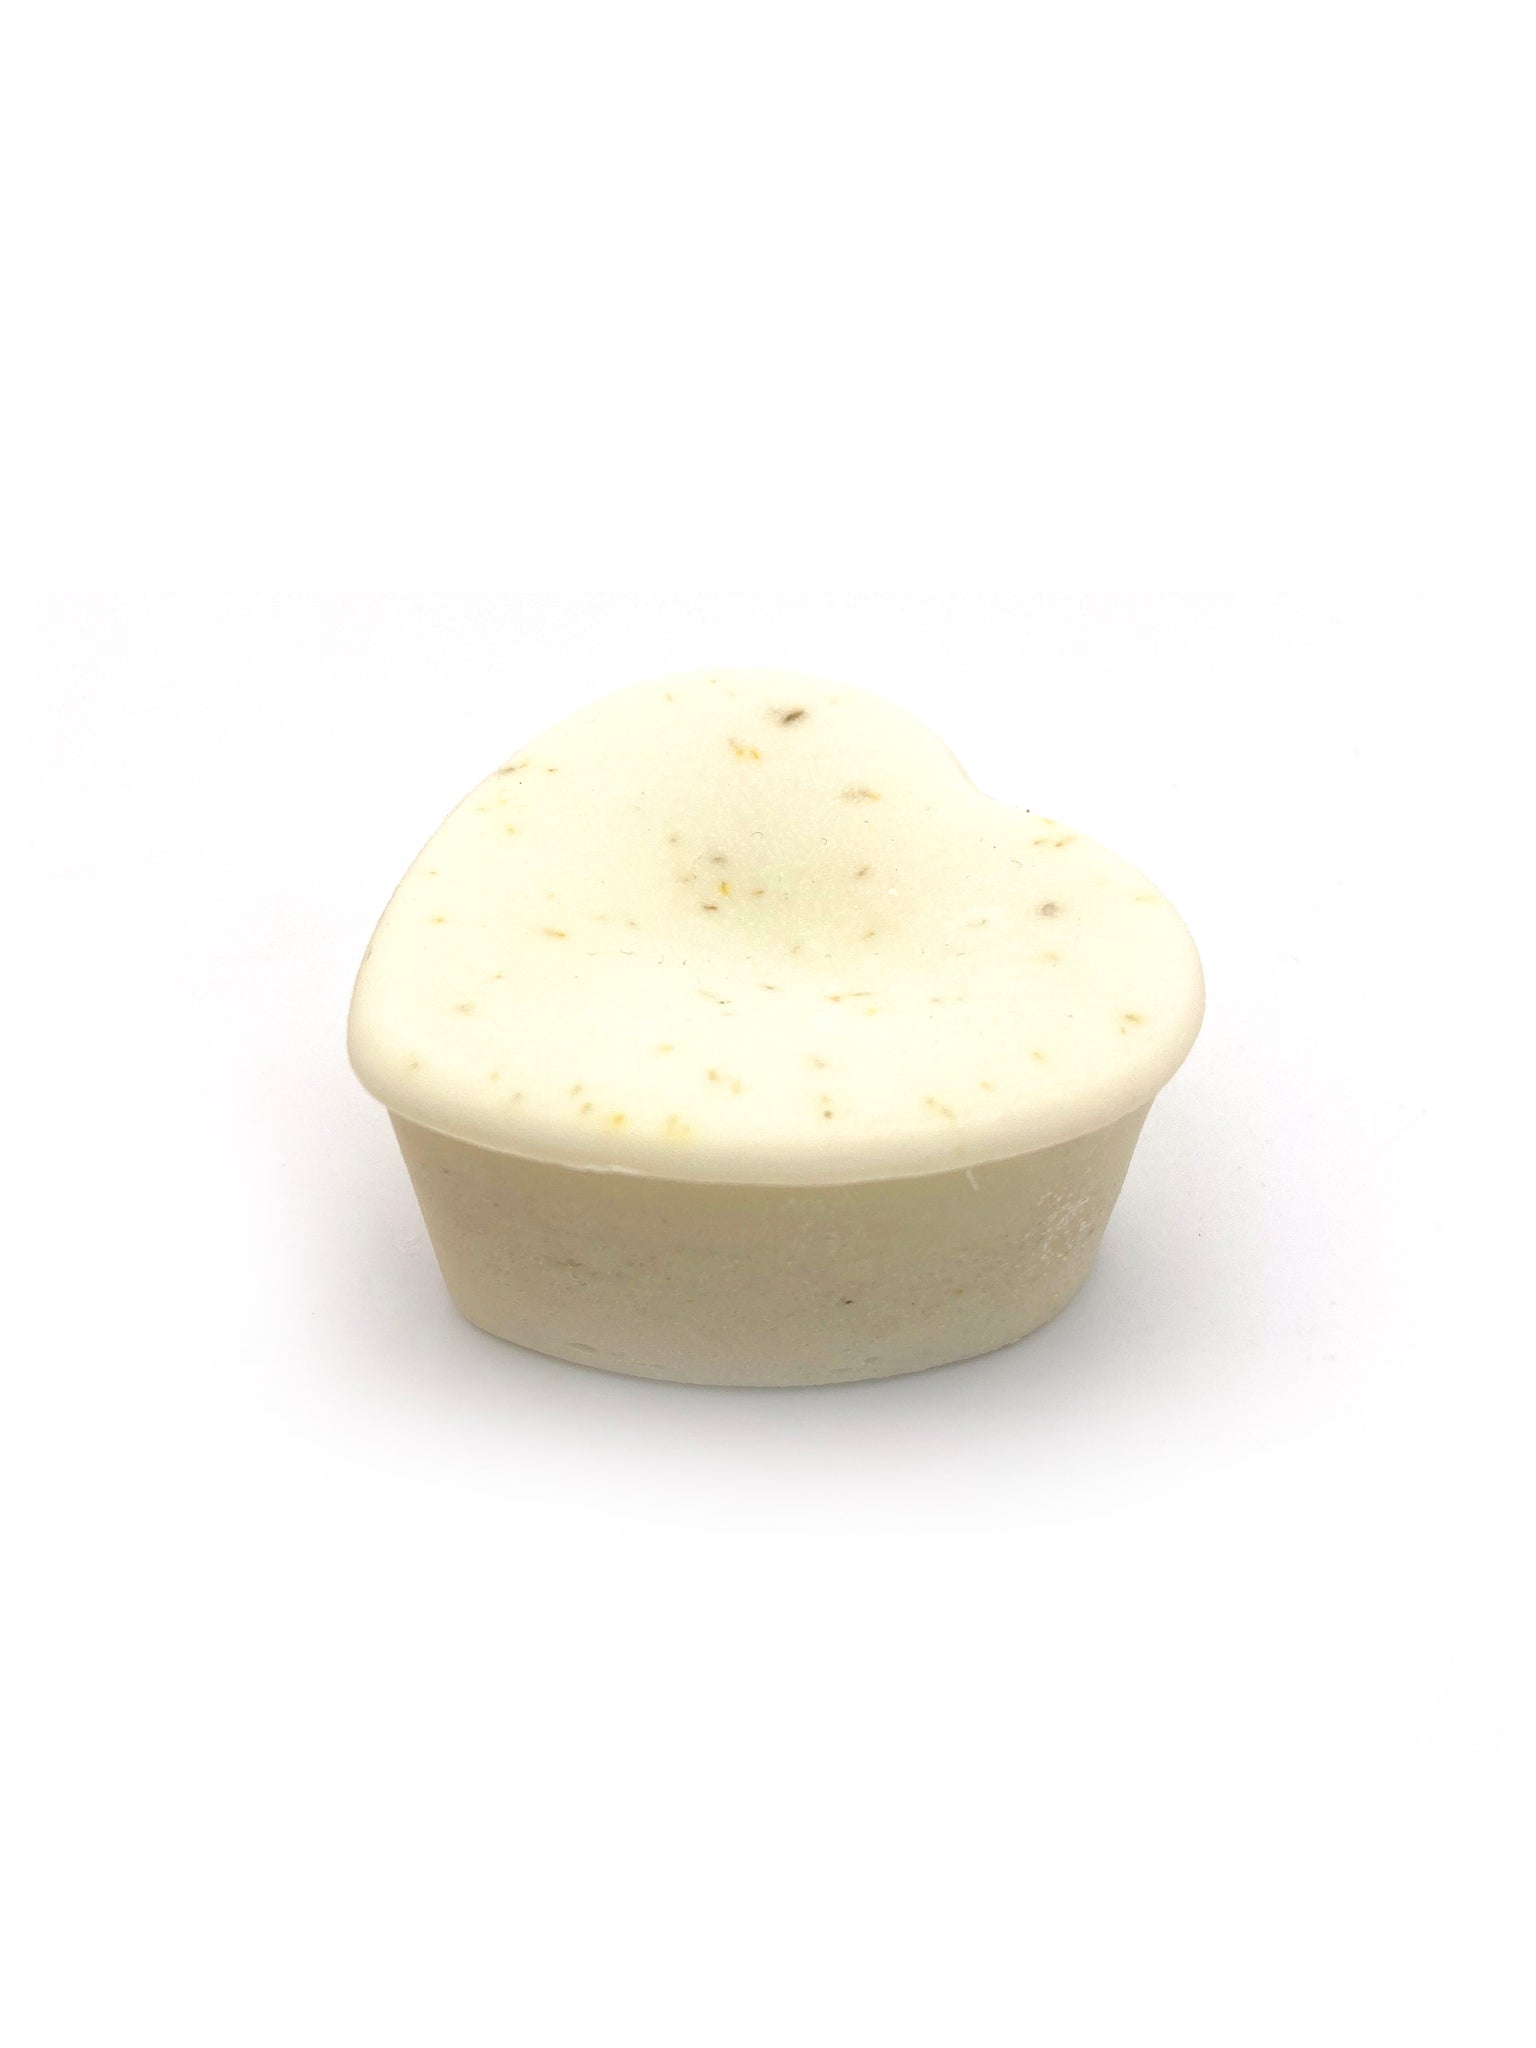 Lavender Chamomile Conditioner Bar 3oz heart - The Apothecary Fairy